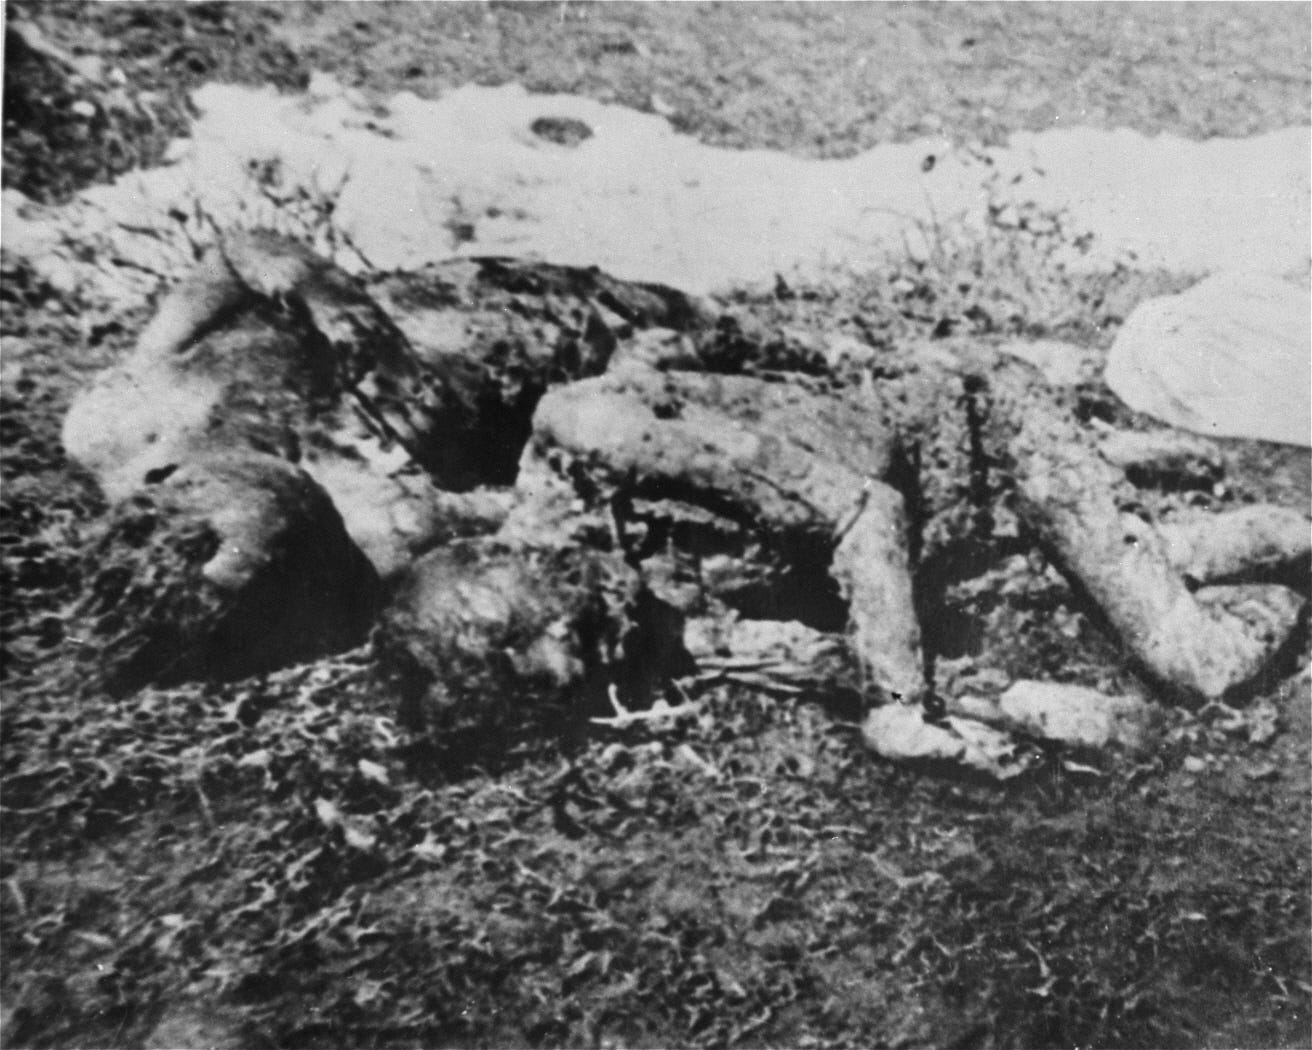 The Horrific Jasenovac Concentration Camp a.k.a. The Auschwitz of Balkans |  History of Yesterday